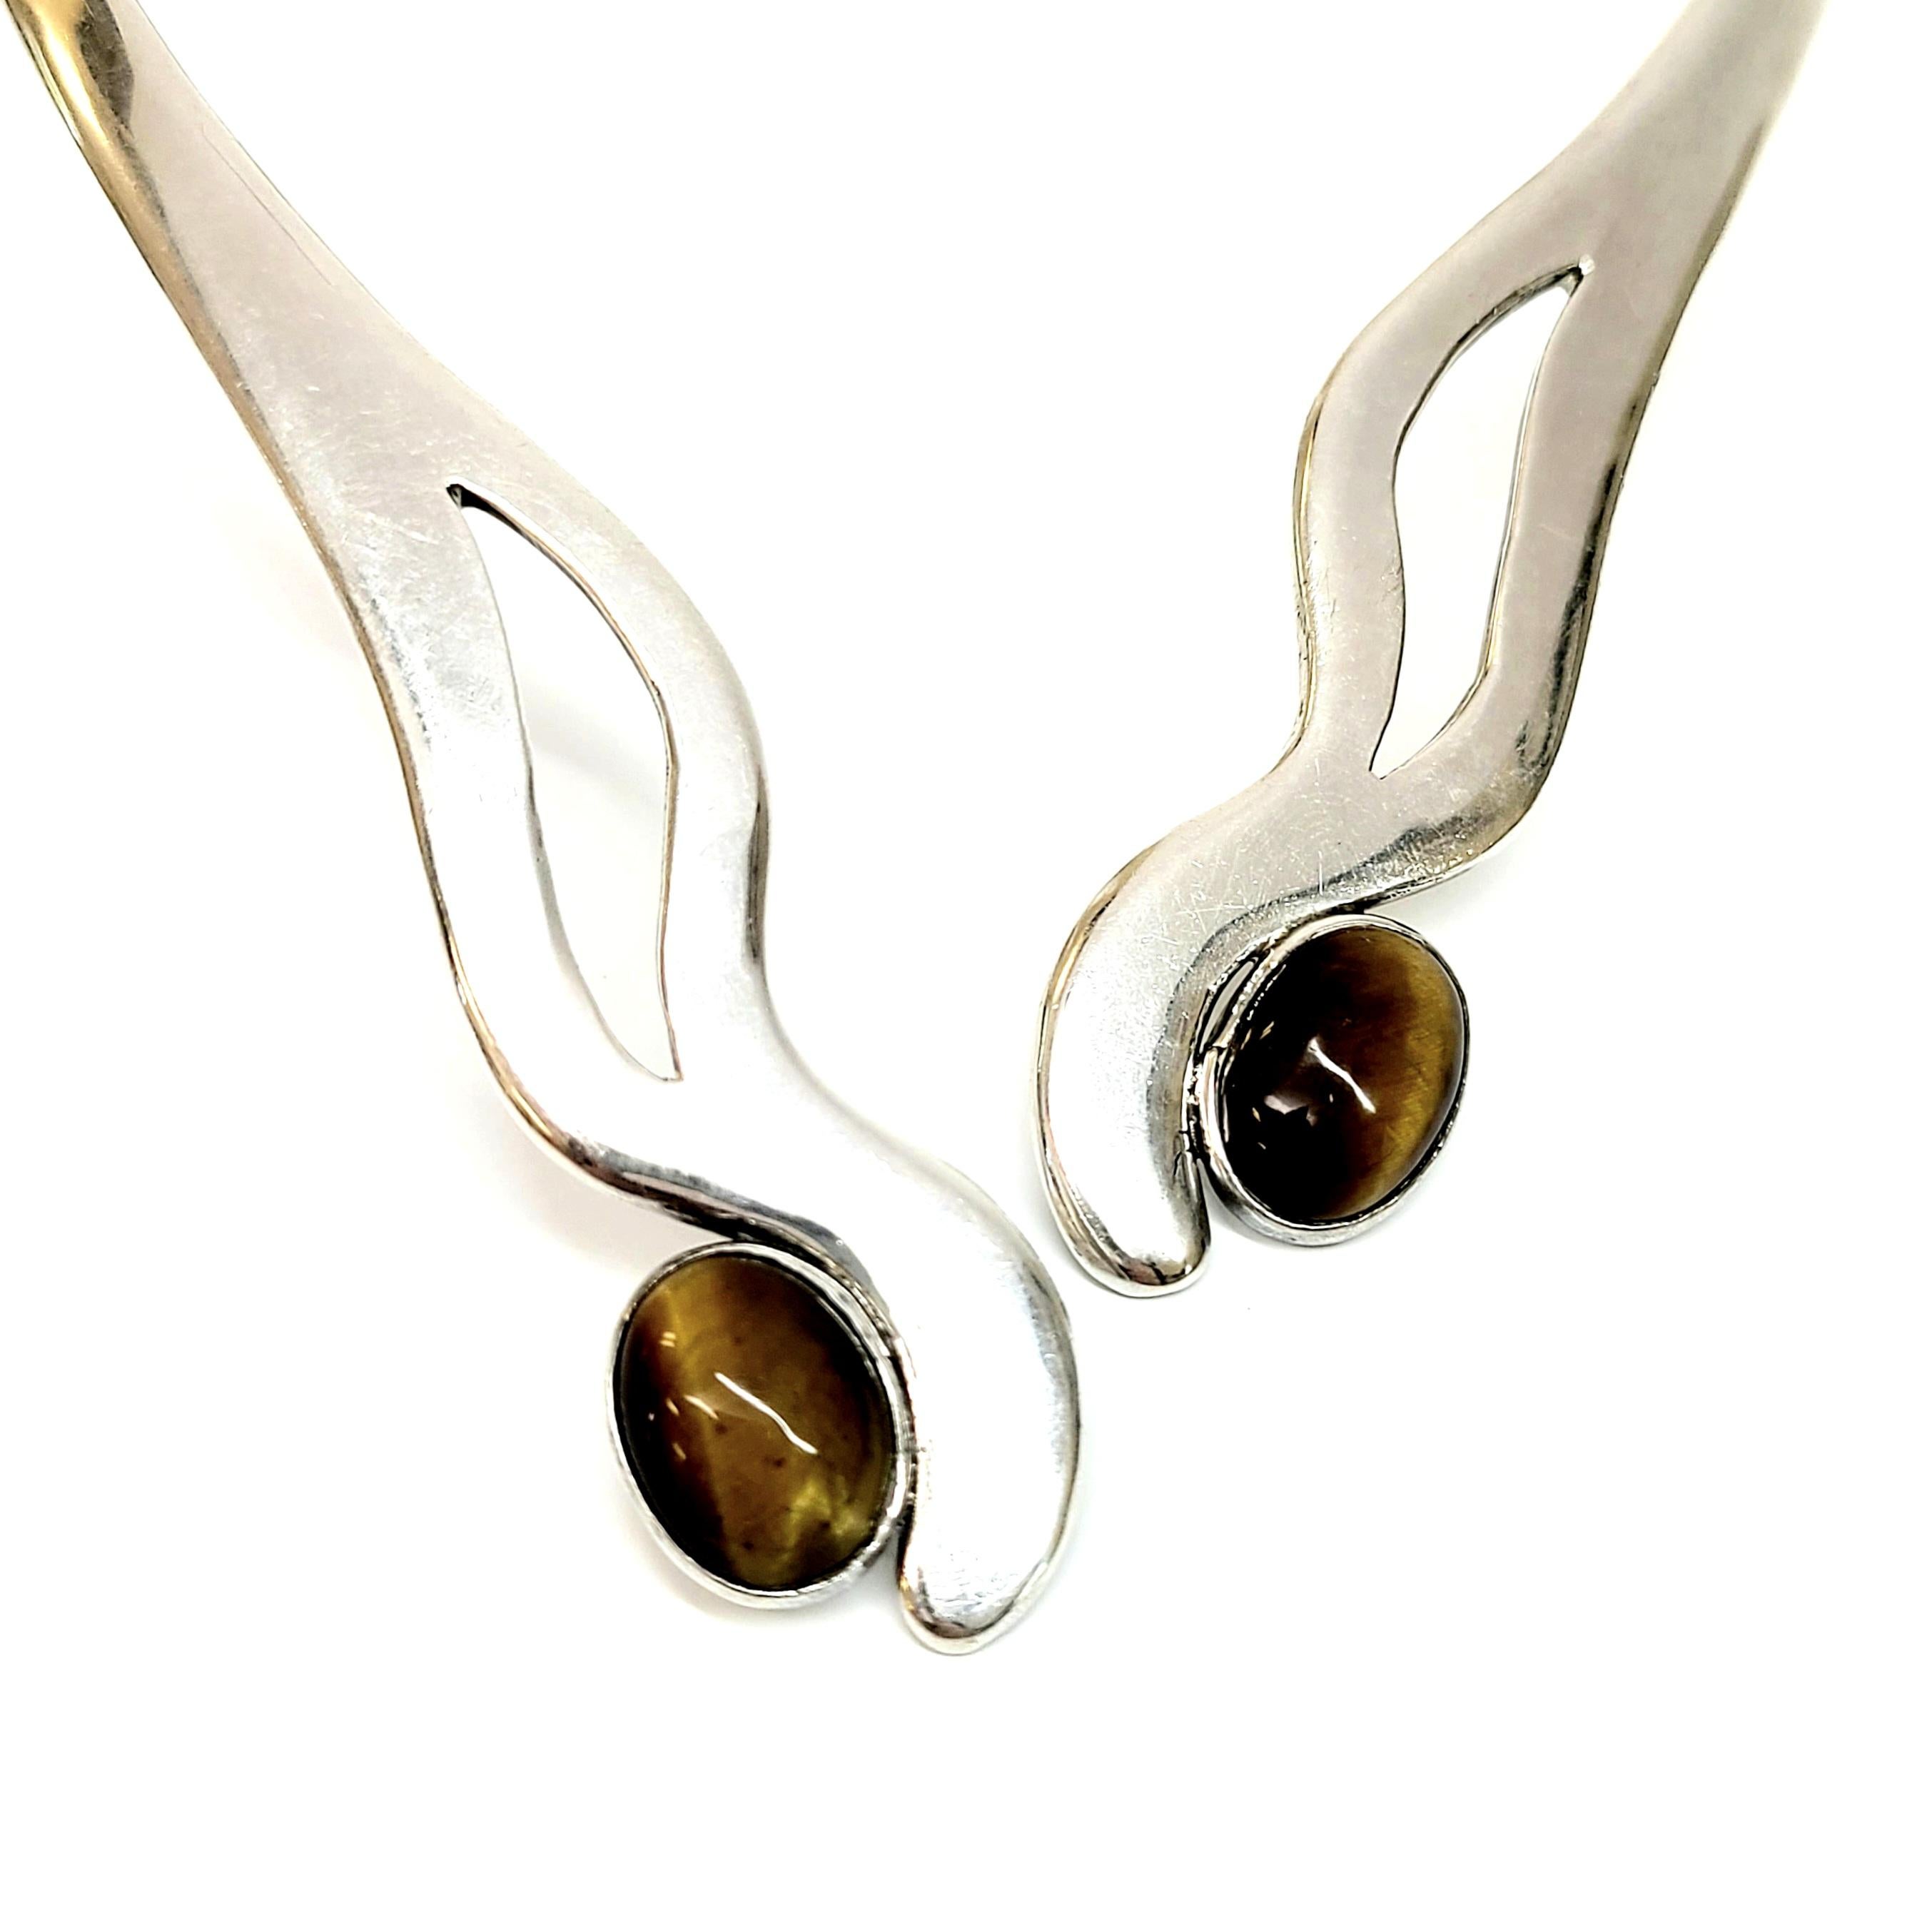 Signed MSA, Mexican sterling silver and tiger's eye clamper necklace.

This beautiful vintage piece, made in Iguala, Mexico, features two oval tiger's eye stones bezel set at the ends of an oblong clamper necklace (hinge at back to open). Designed